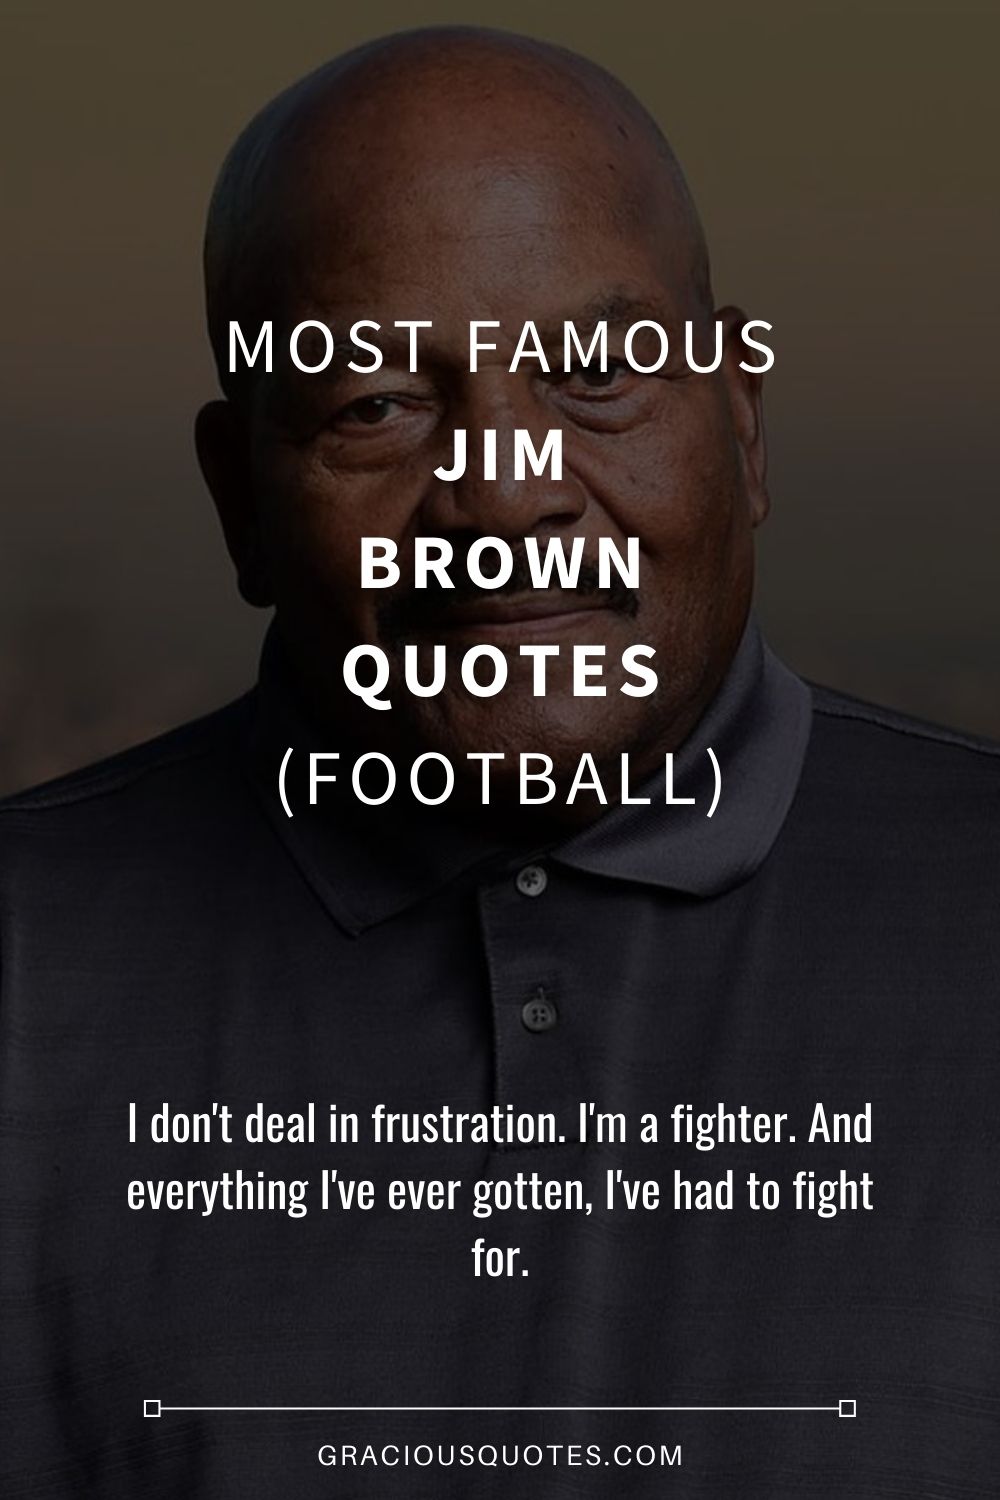 Most Famous Jim Brown Quotes (FOOTBALL) - Gracious Quotes